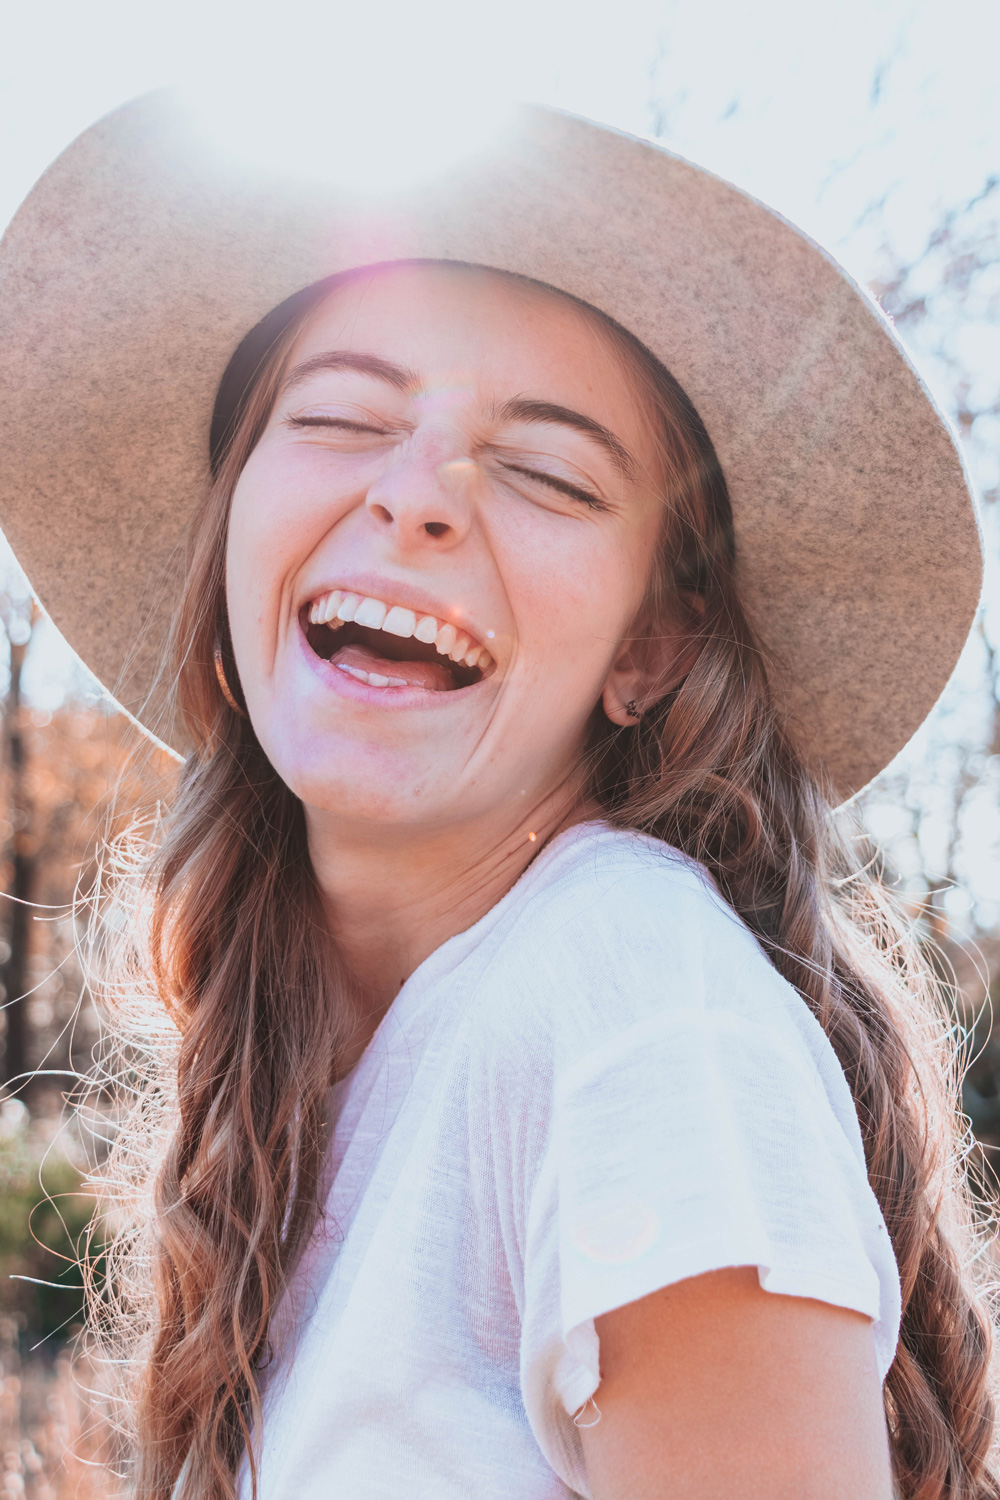 Girl smiling and laughing